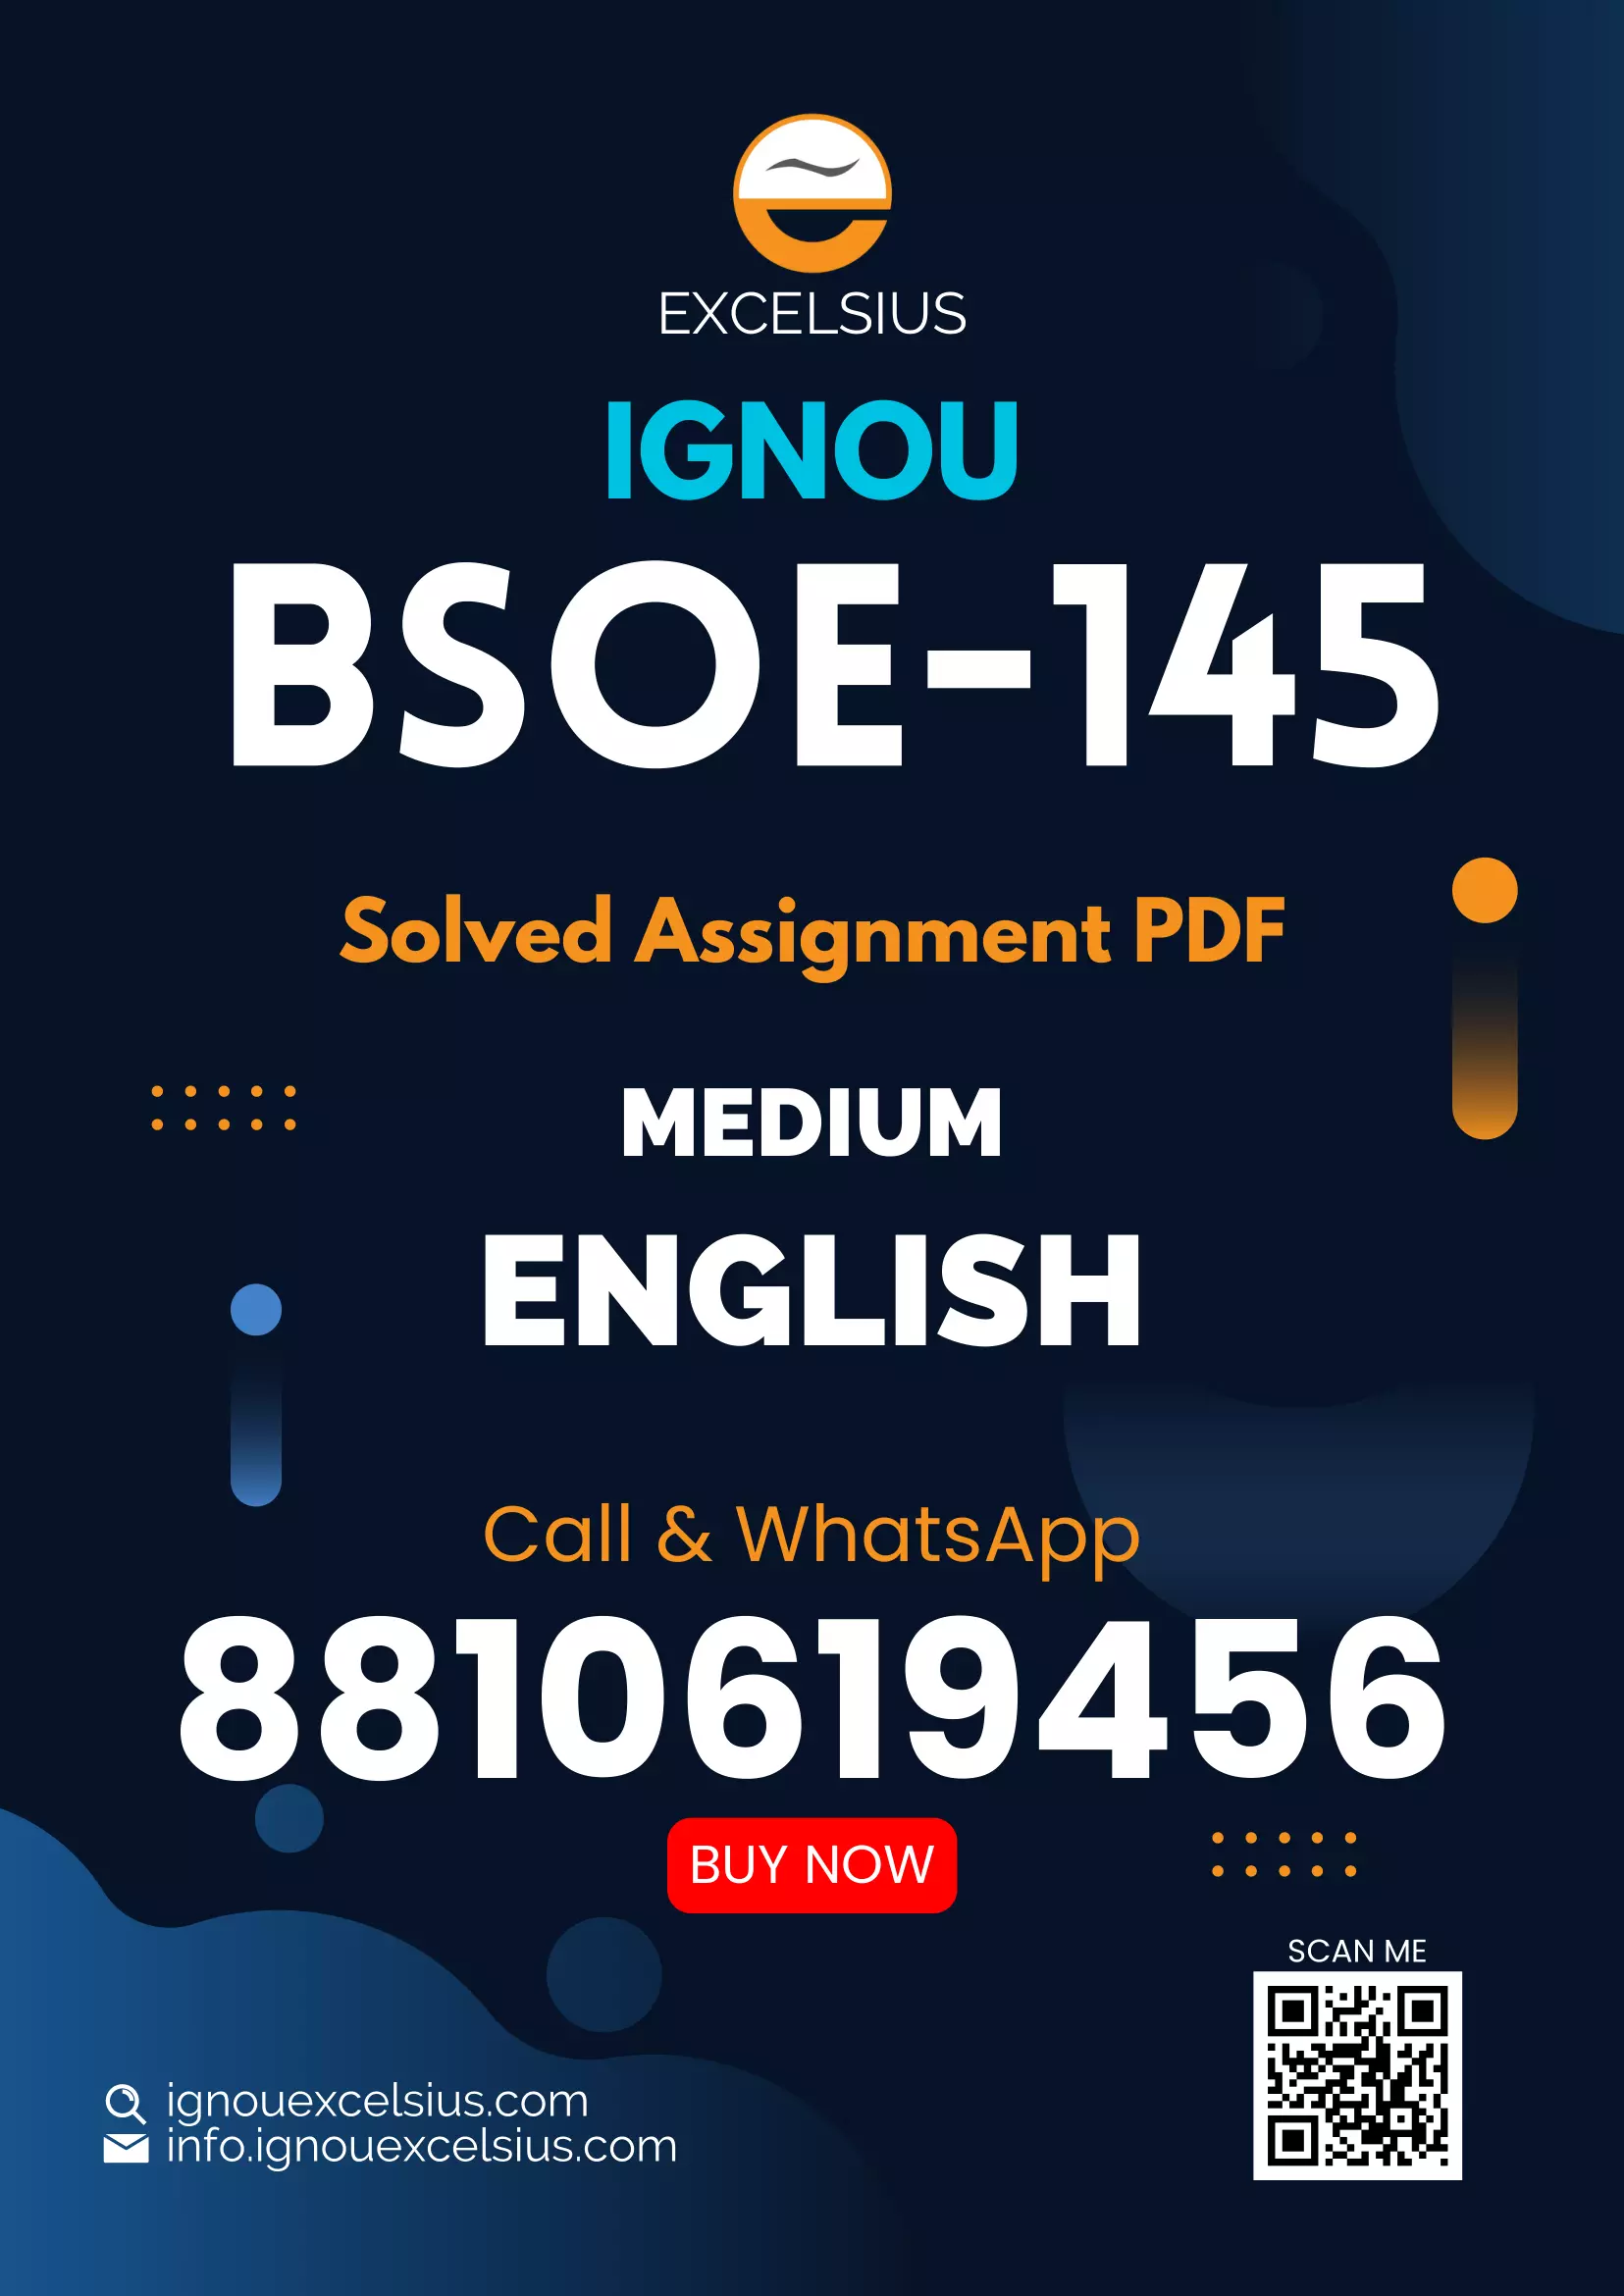 IGNOU BSOE-145 - Religion and Society, Latest Solved Assignment-July 2022 – January 2023